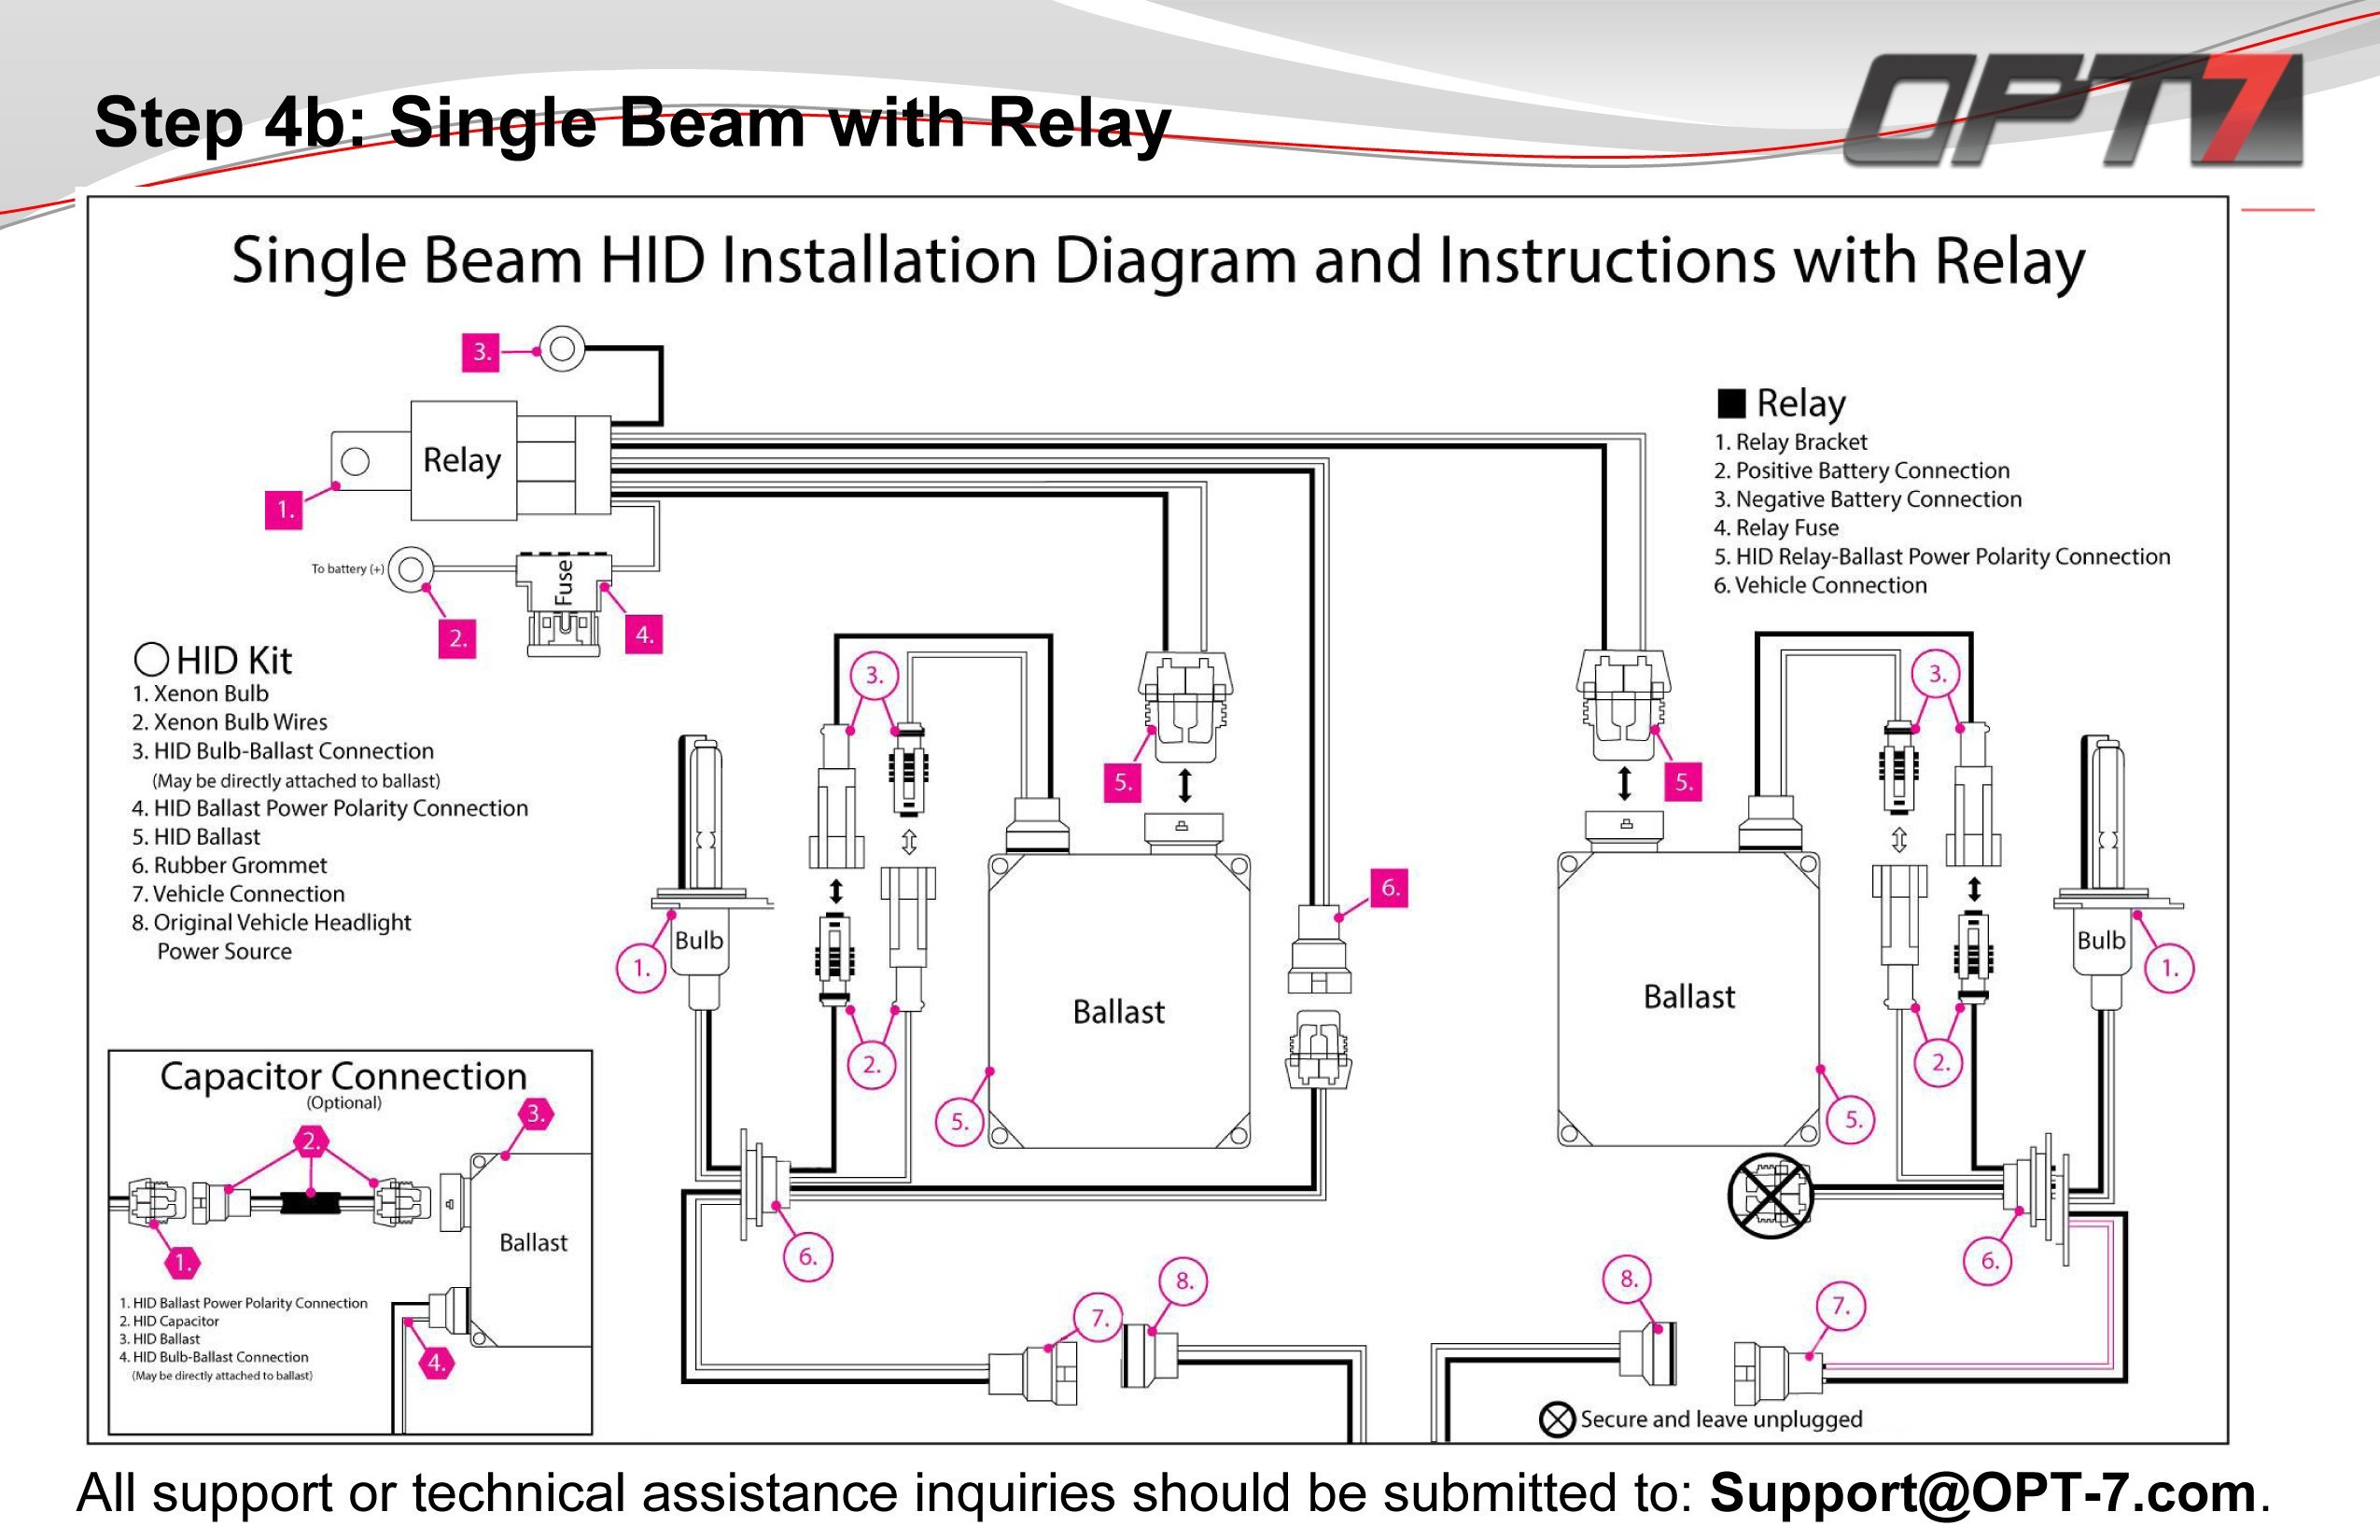 hid wiring diagram with relay Download Wiring Diagram for Hid Relay Valid Hid Wiring Diagram DOWNLOAD Wiring Diagram